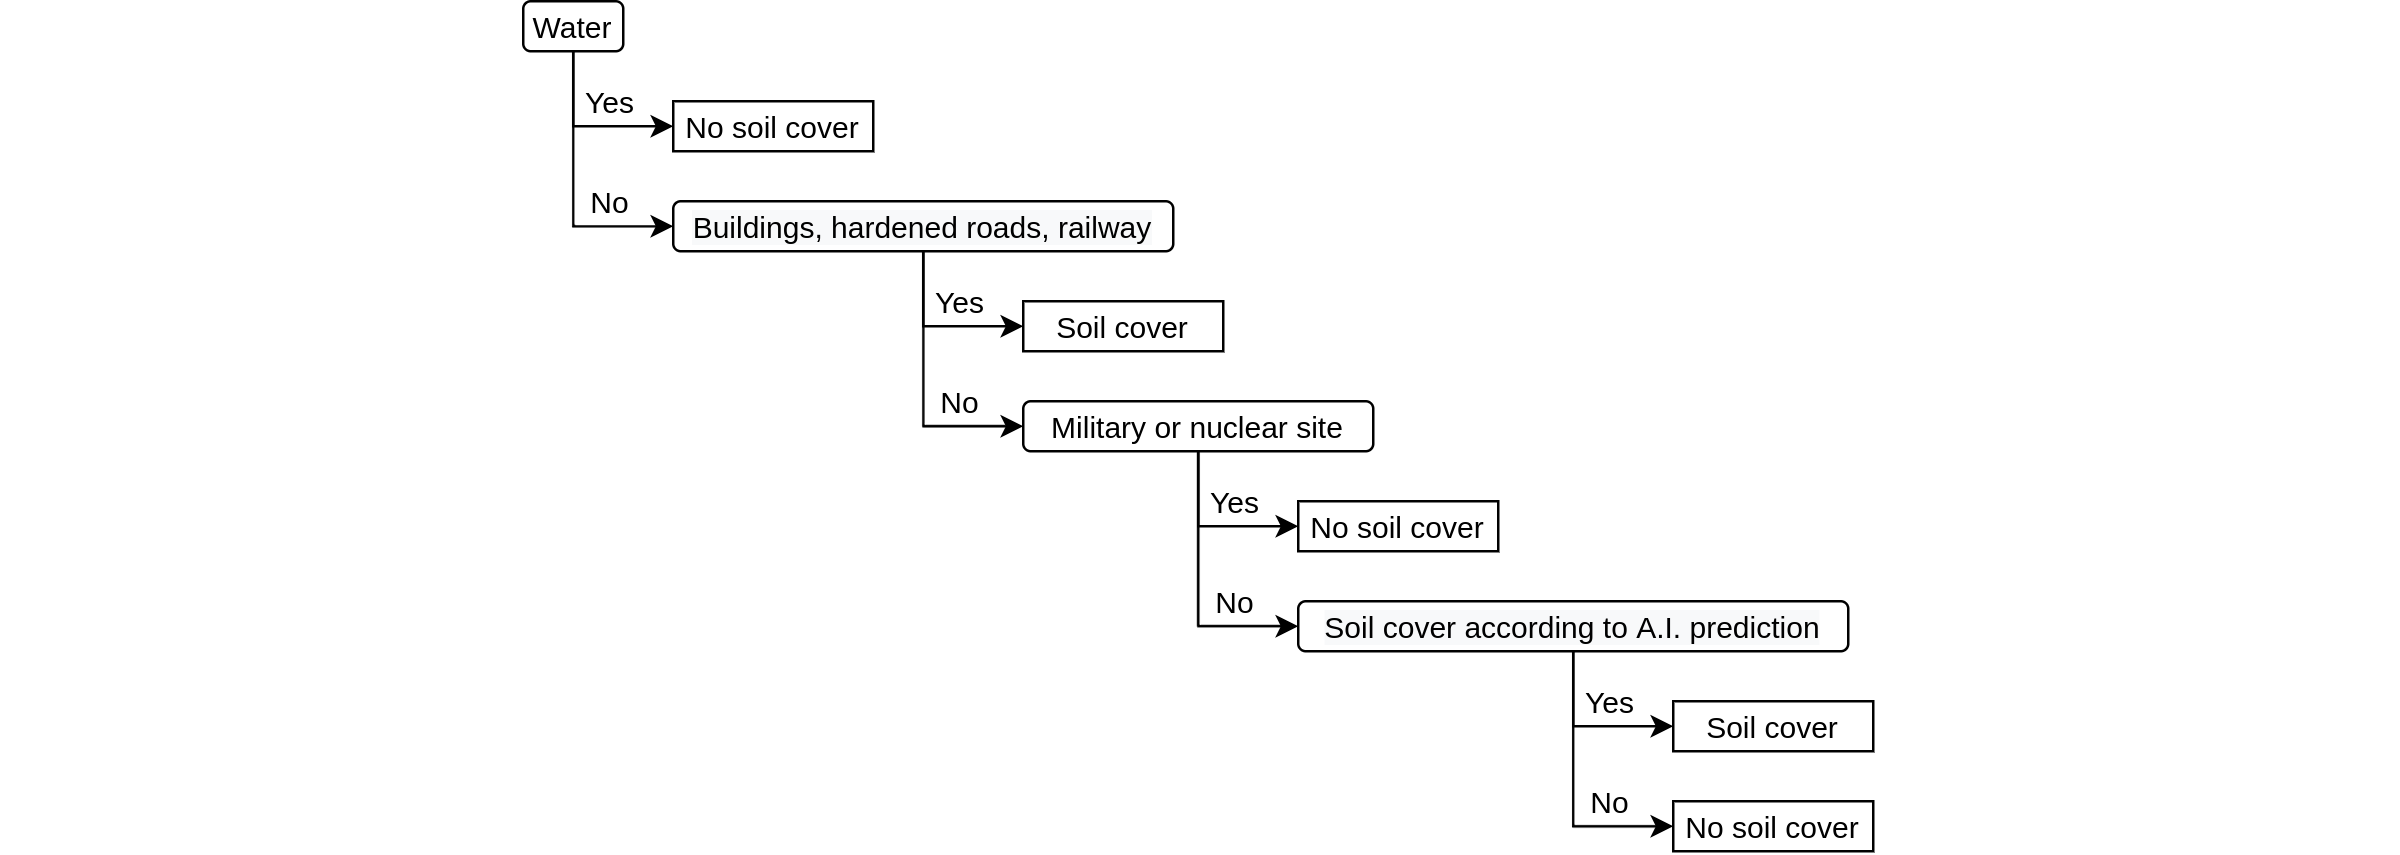 Simplified version of the decision tree: for every raster cell we check if it should be assigned soil cover or not.